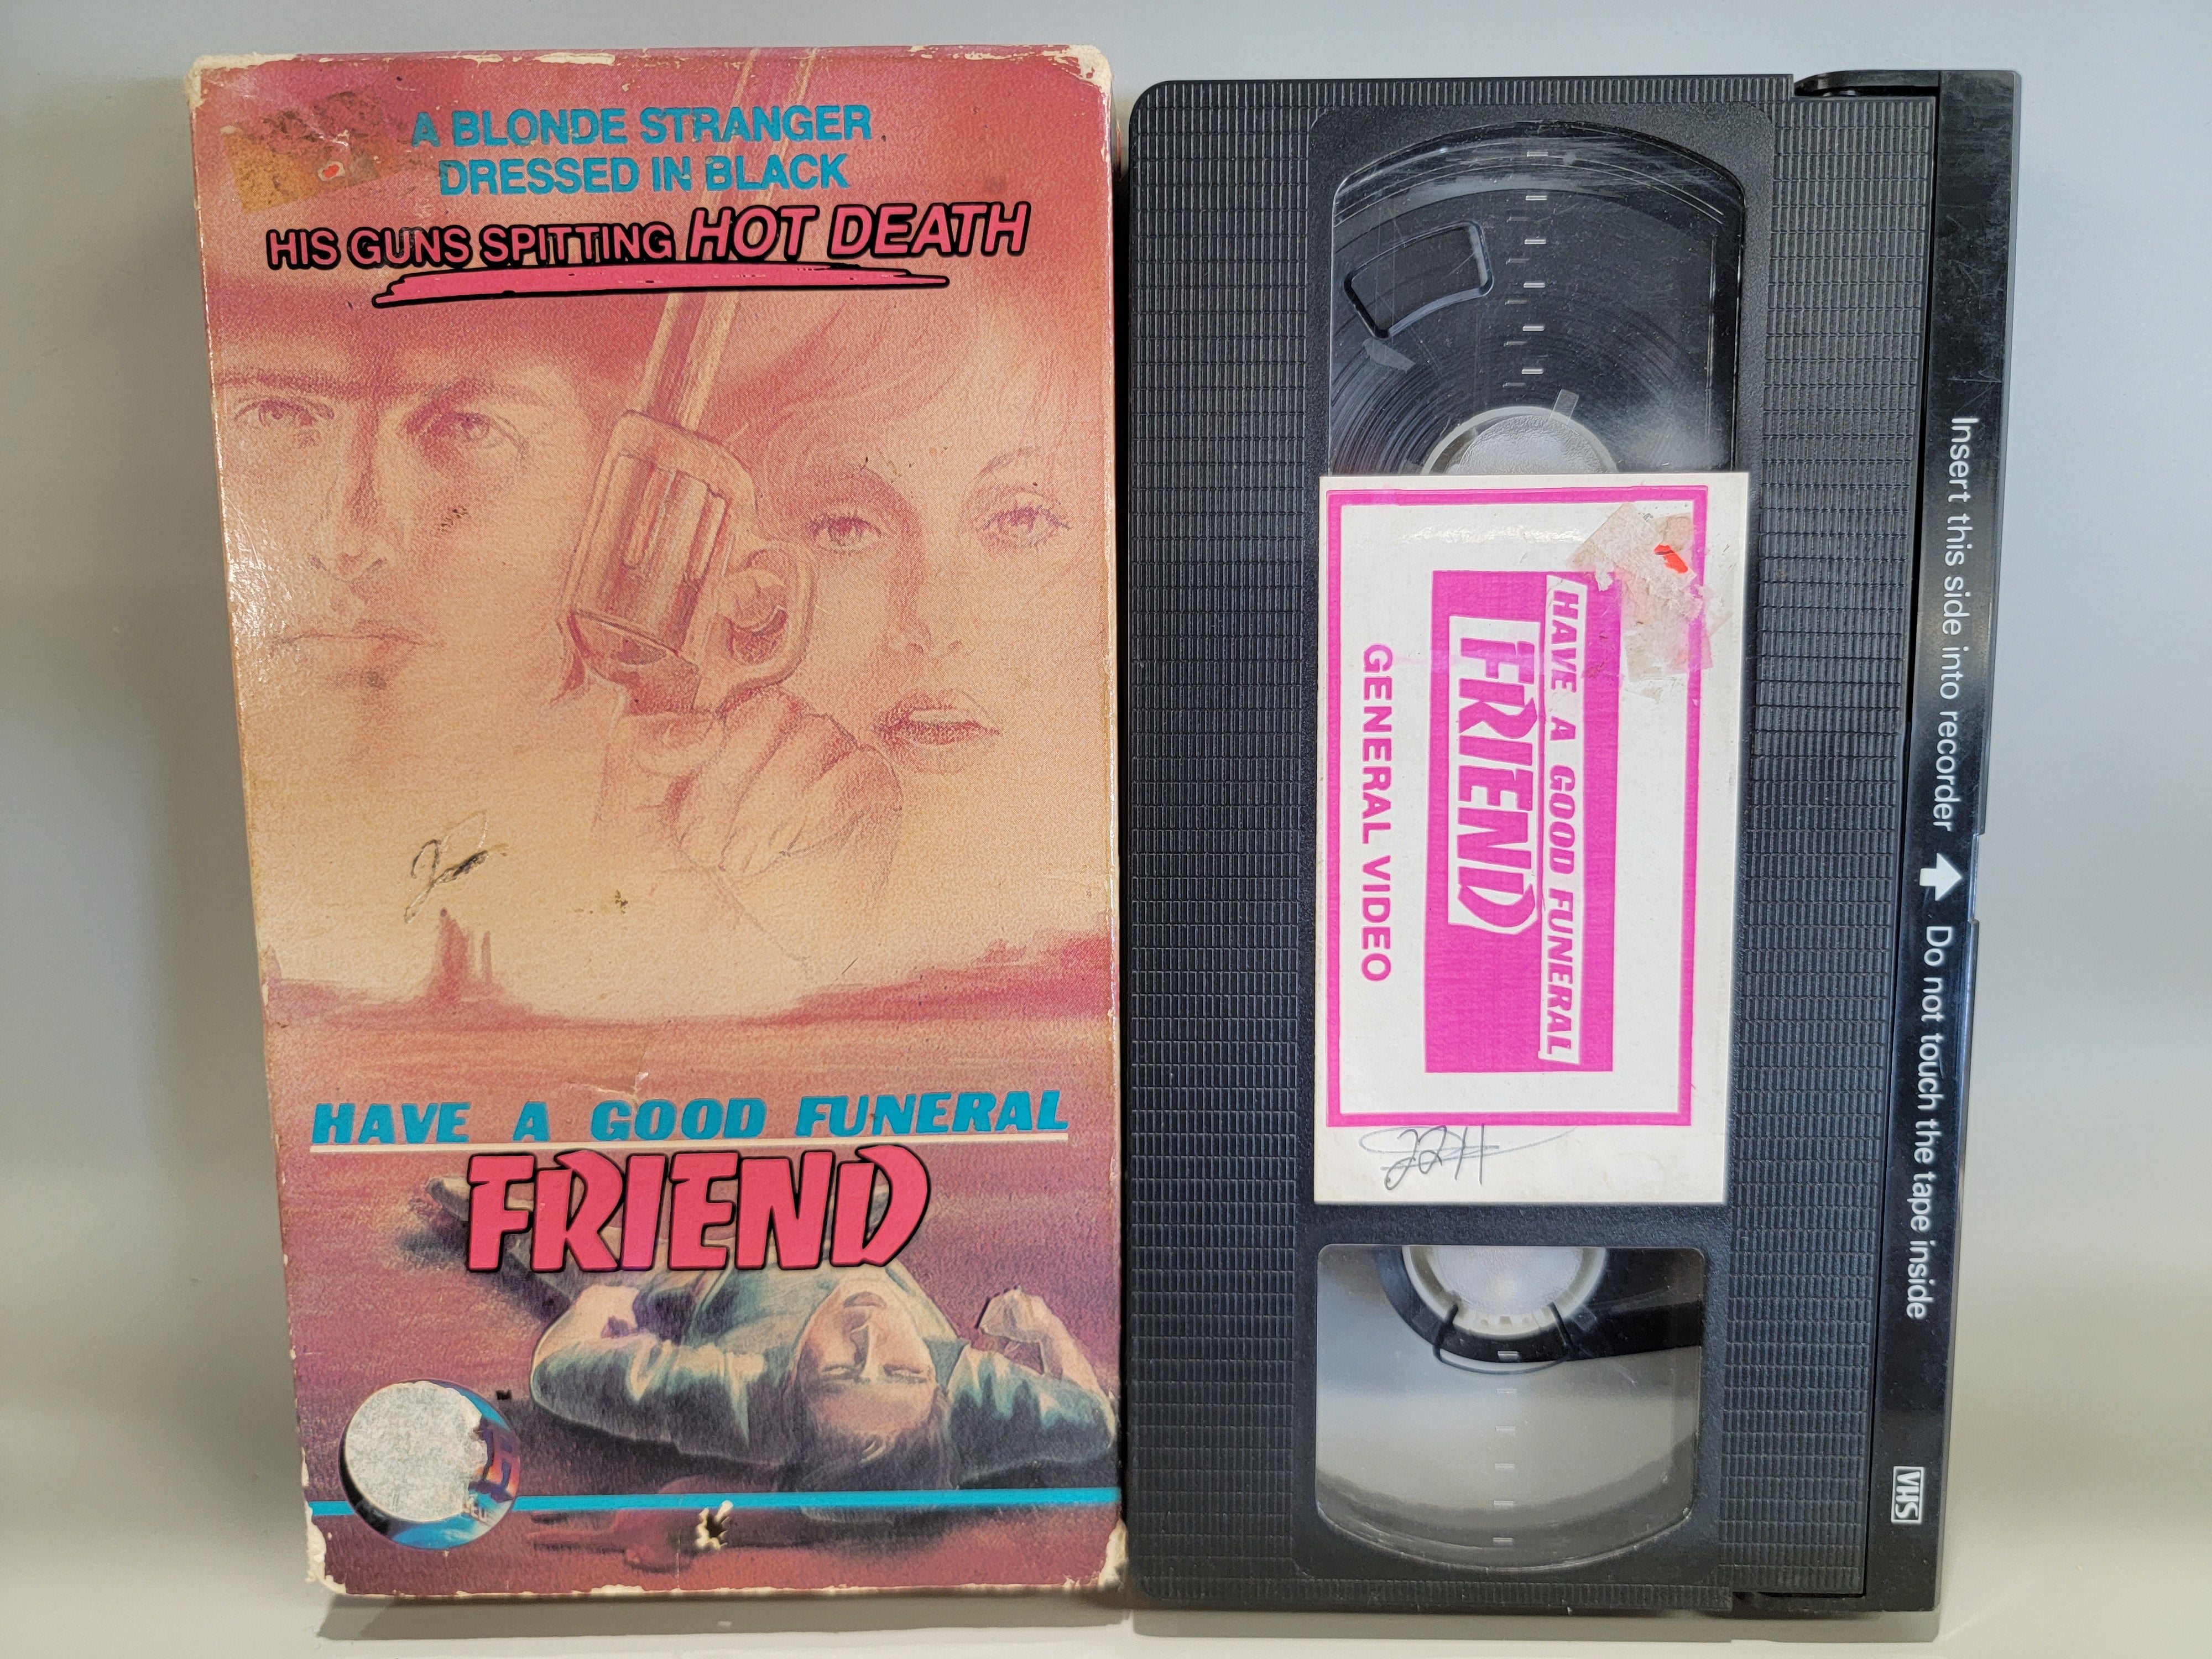 HAVE A GOOD FUNERAL FRIEND VHS [USED]